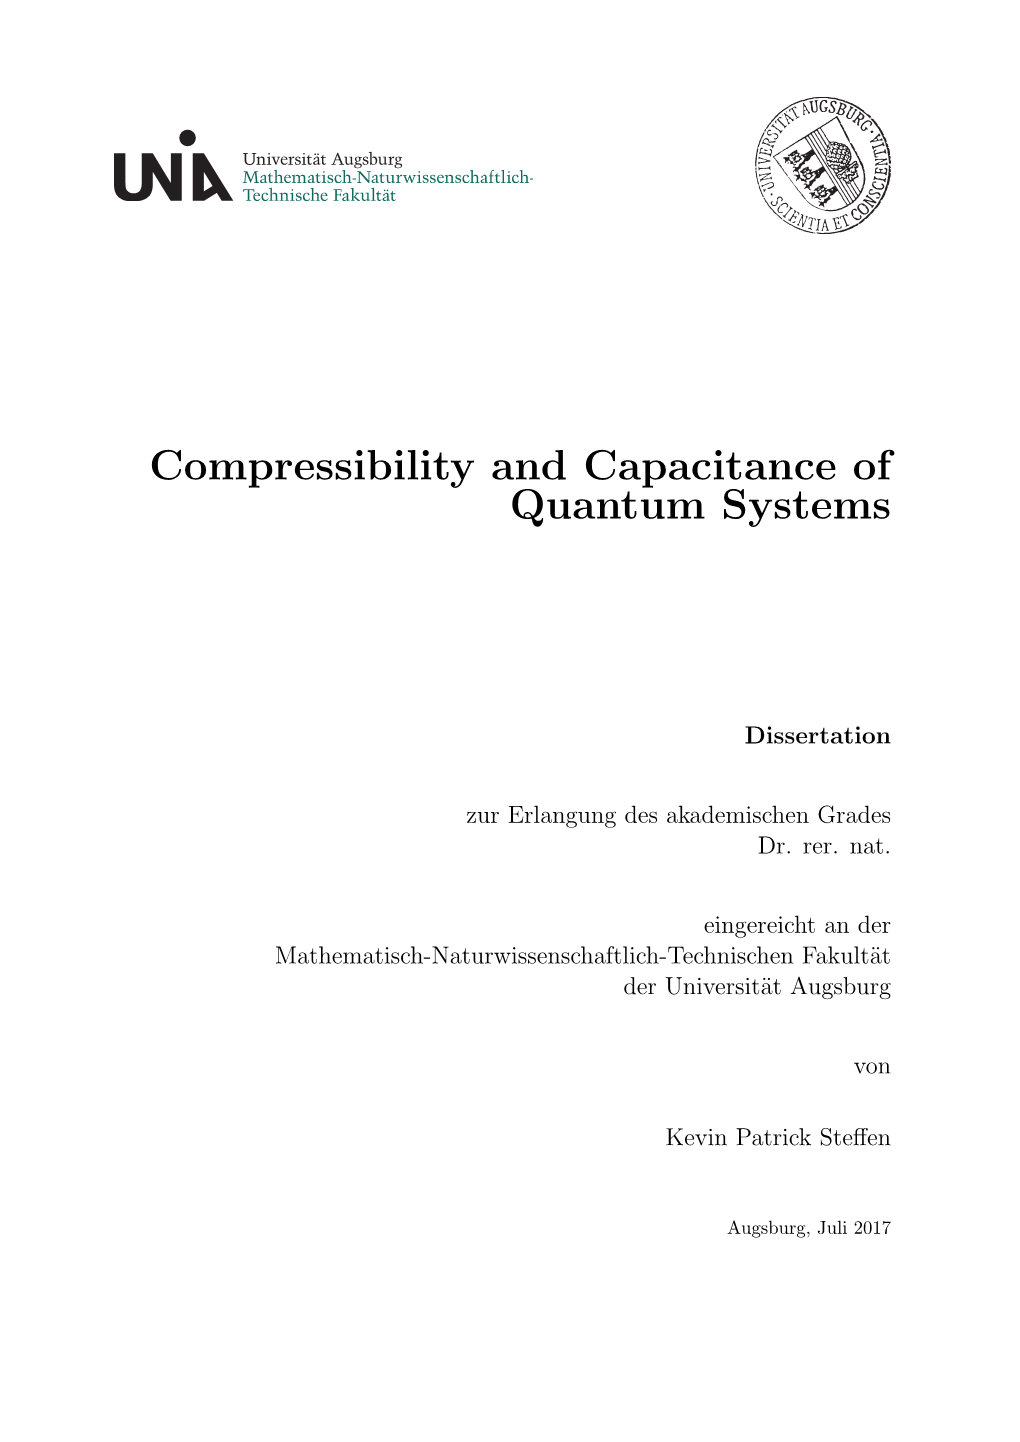 Compressibility and Capacitance of Quantum Systems